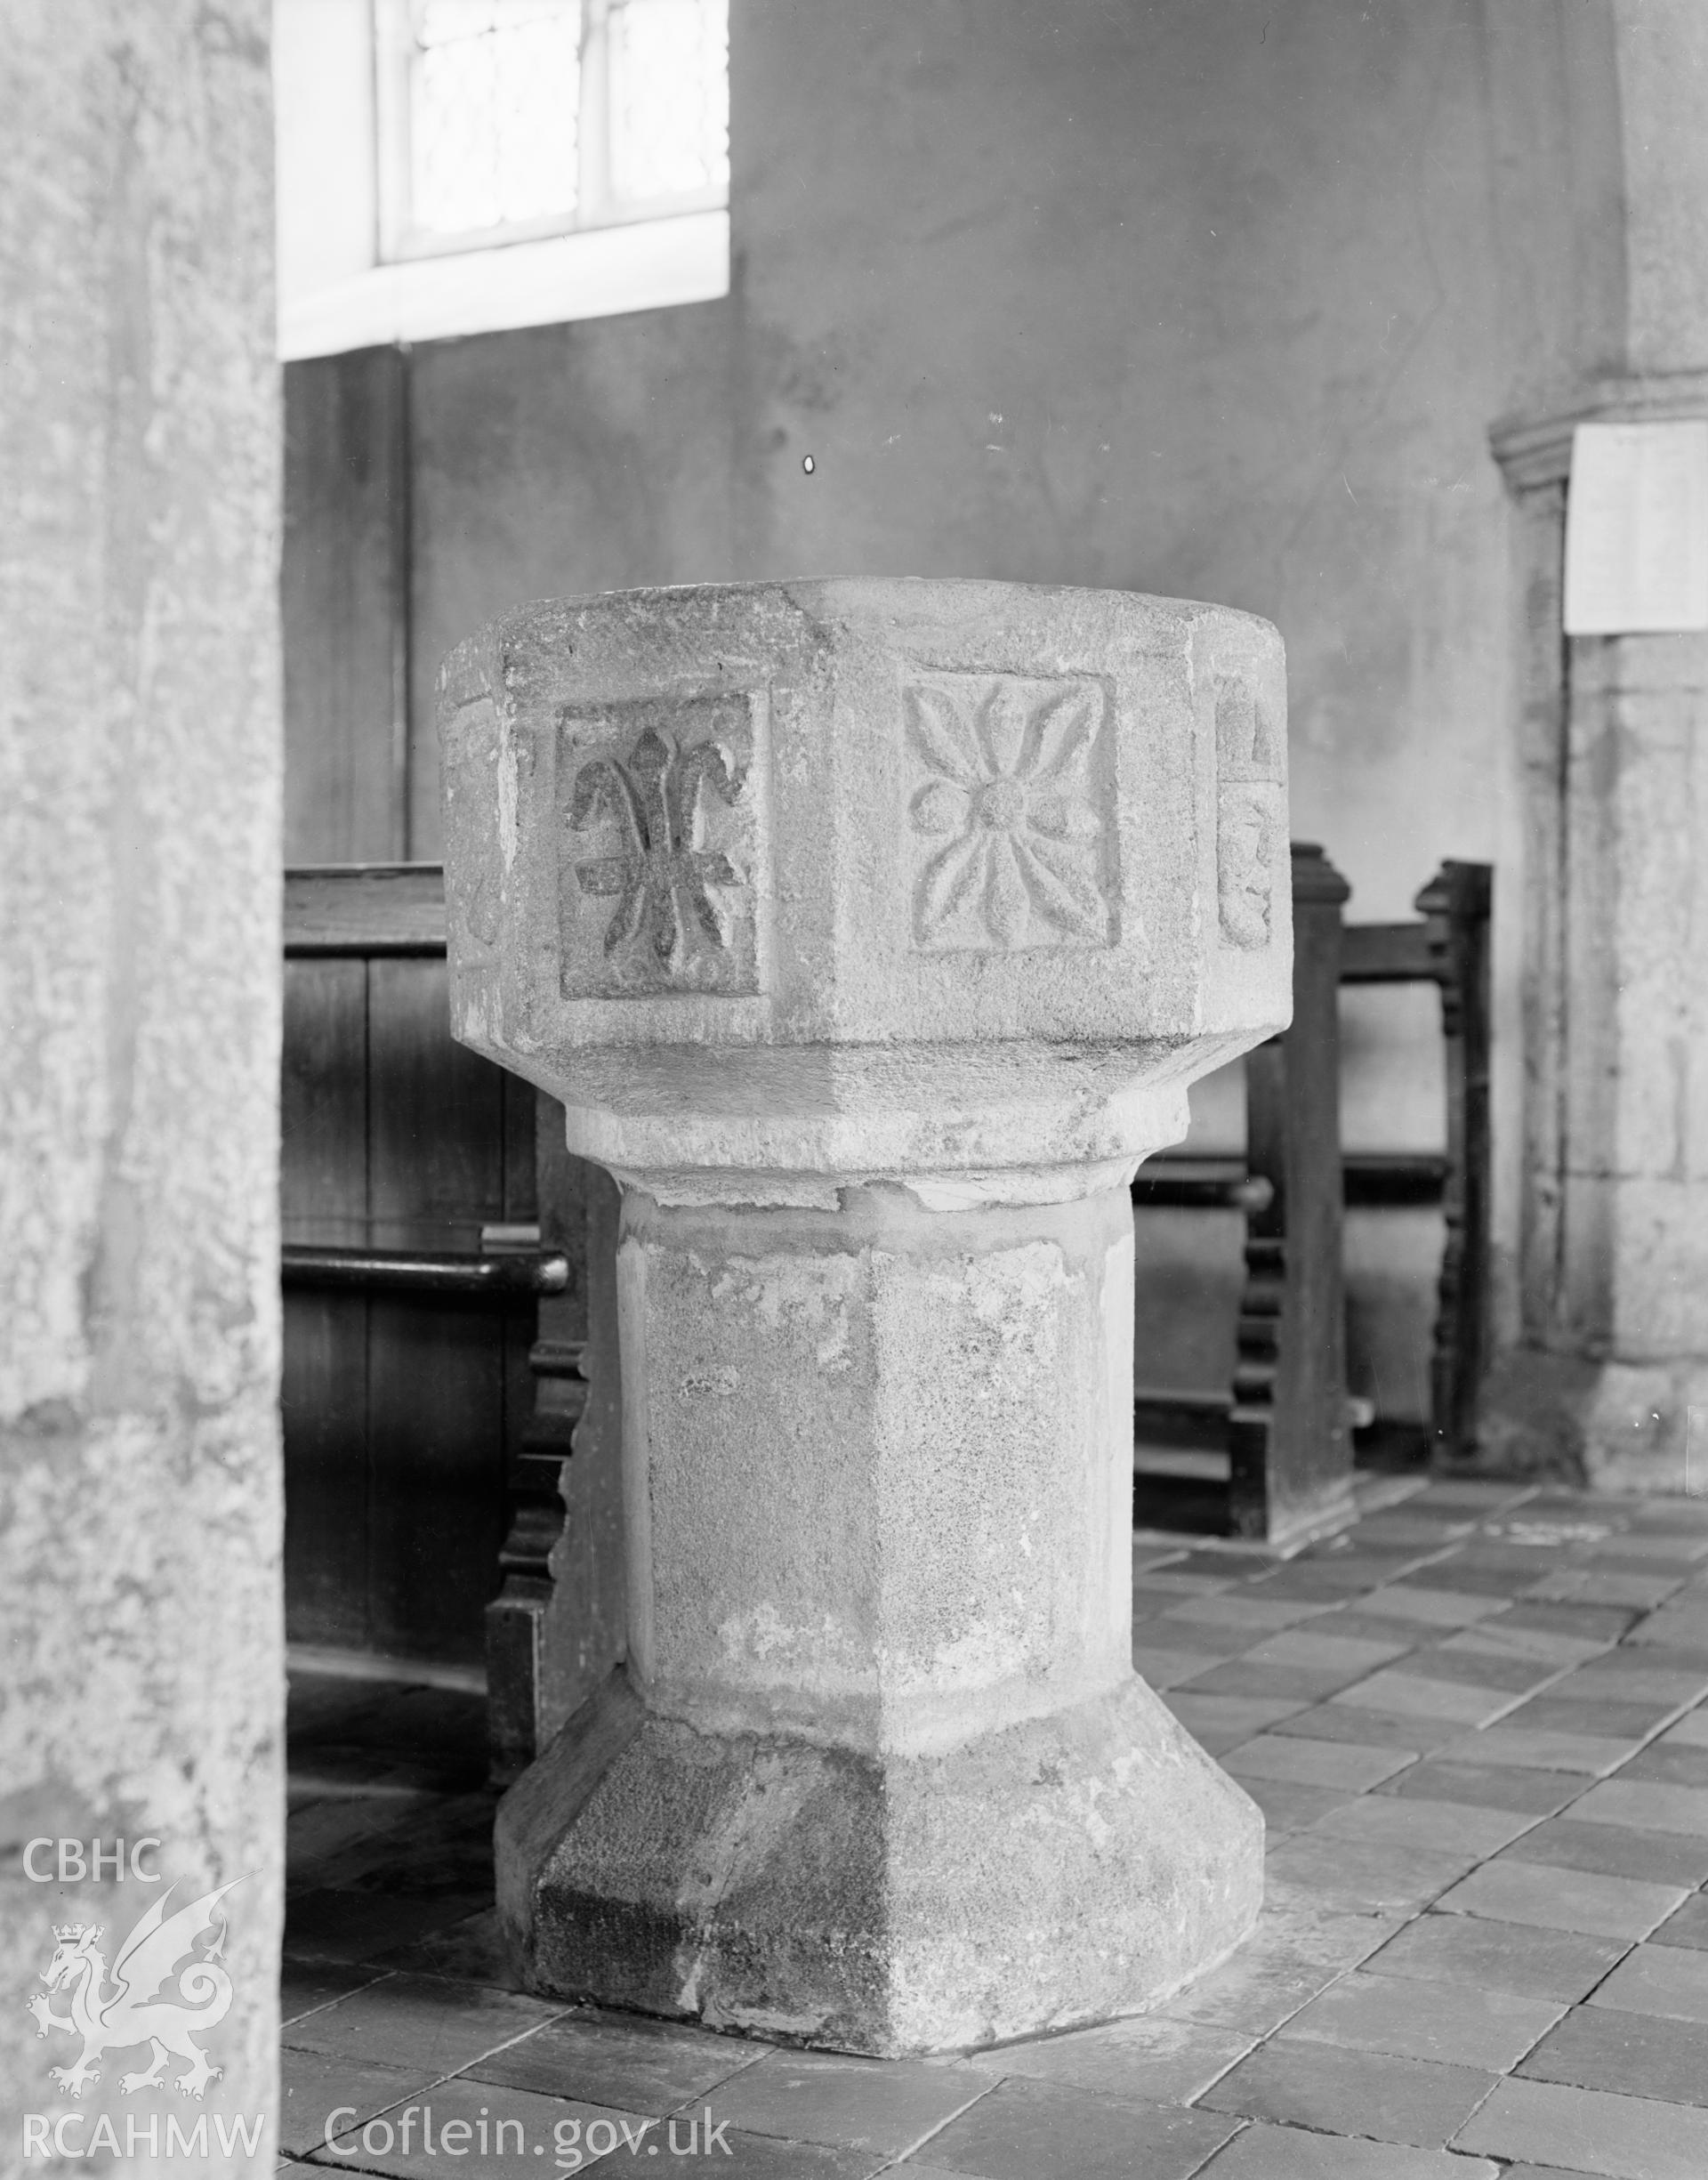 Black and white nitrate negative showing the font at Llangwnadl Church.